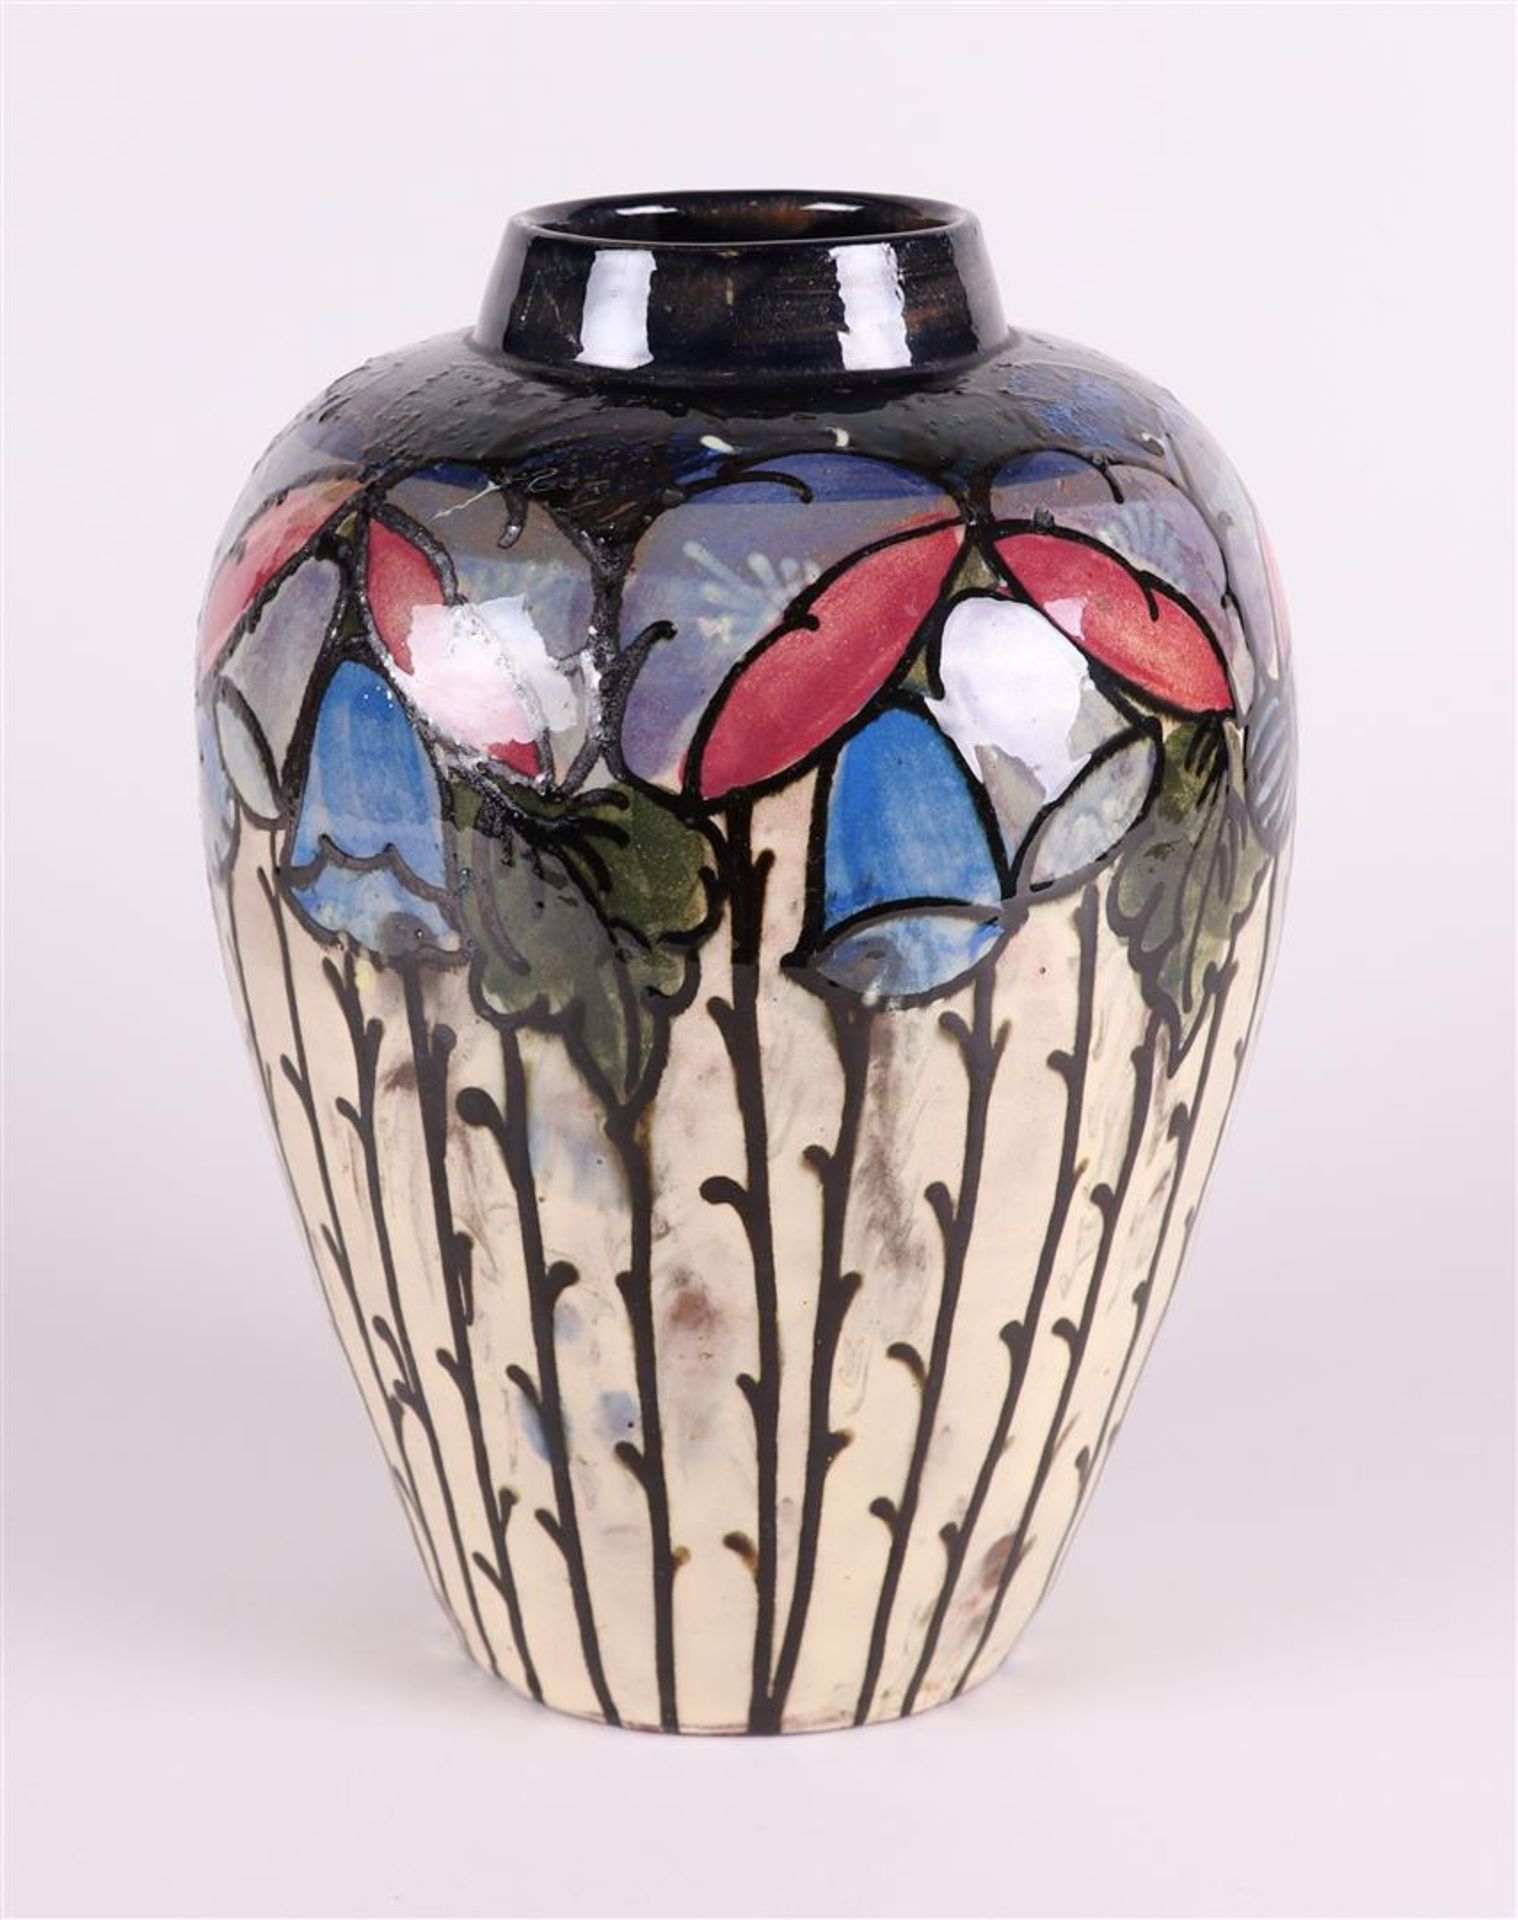 An Art Nouveau style polychrome painted earthenware vase, marked: "Bovey". Early 20th century.